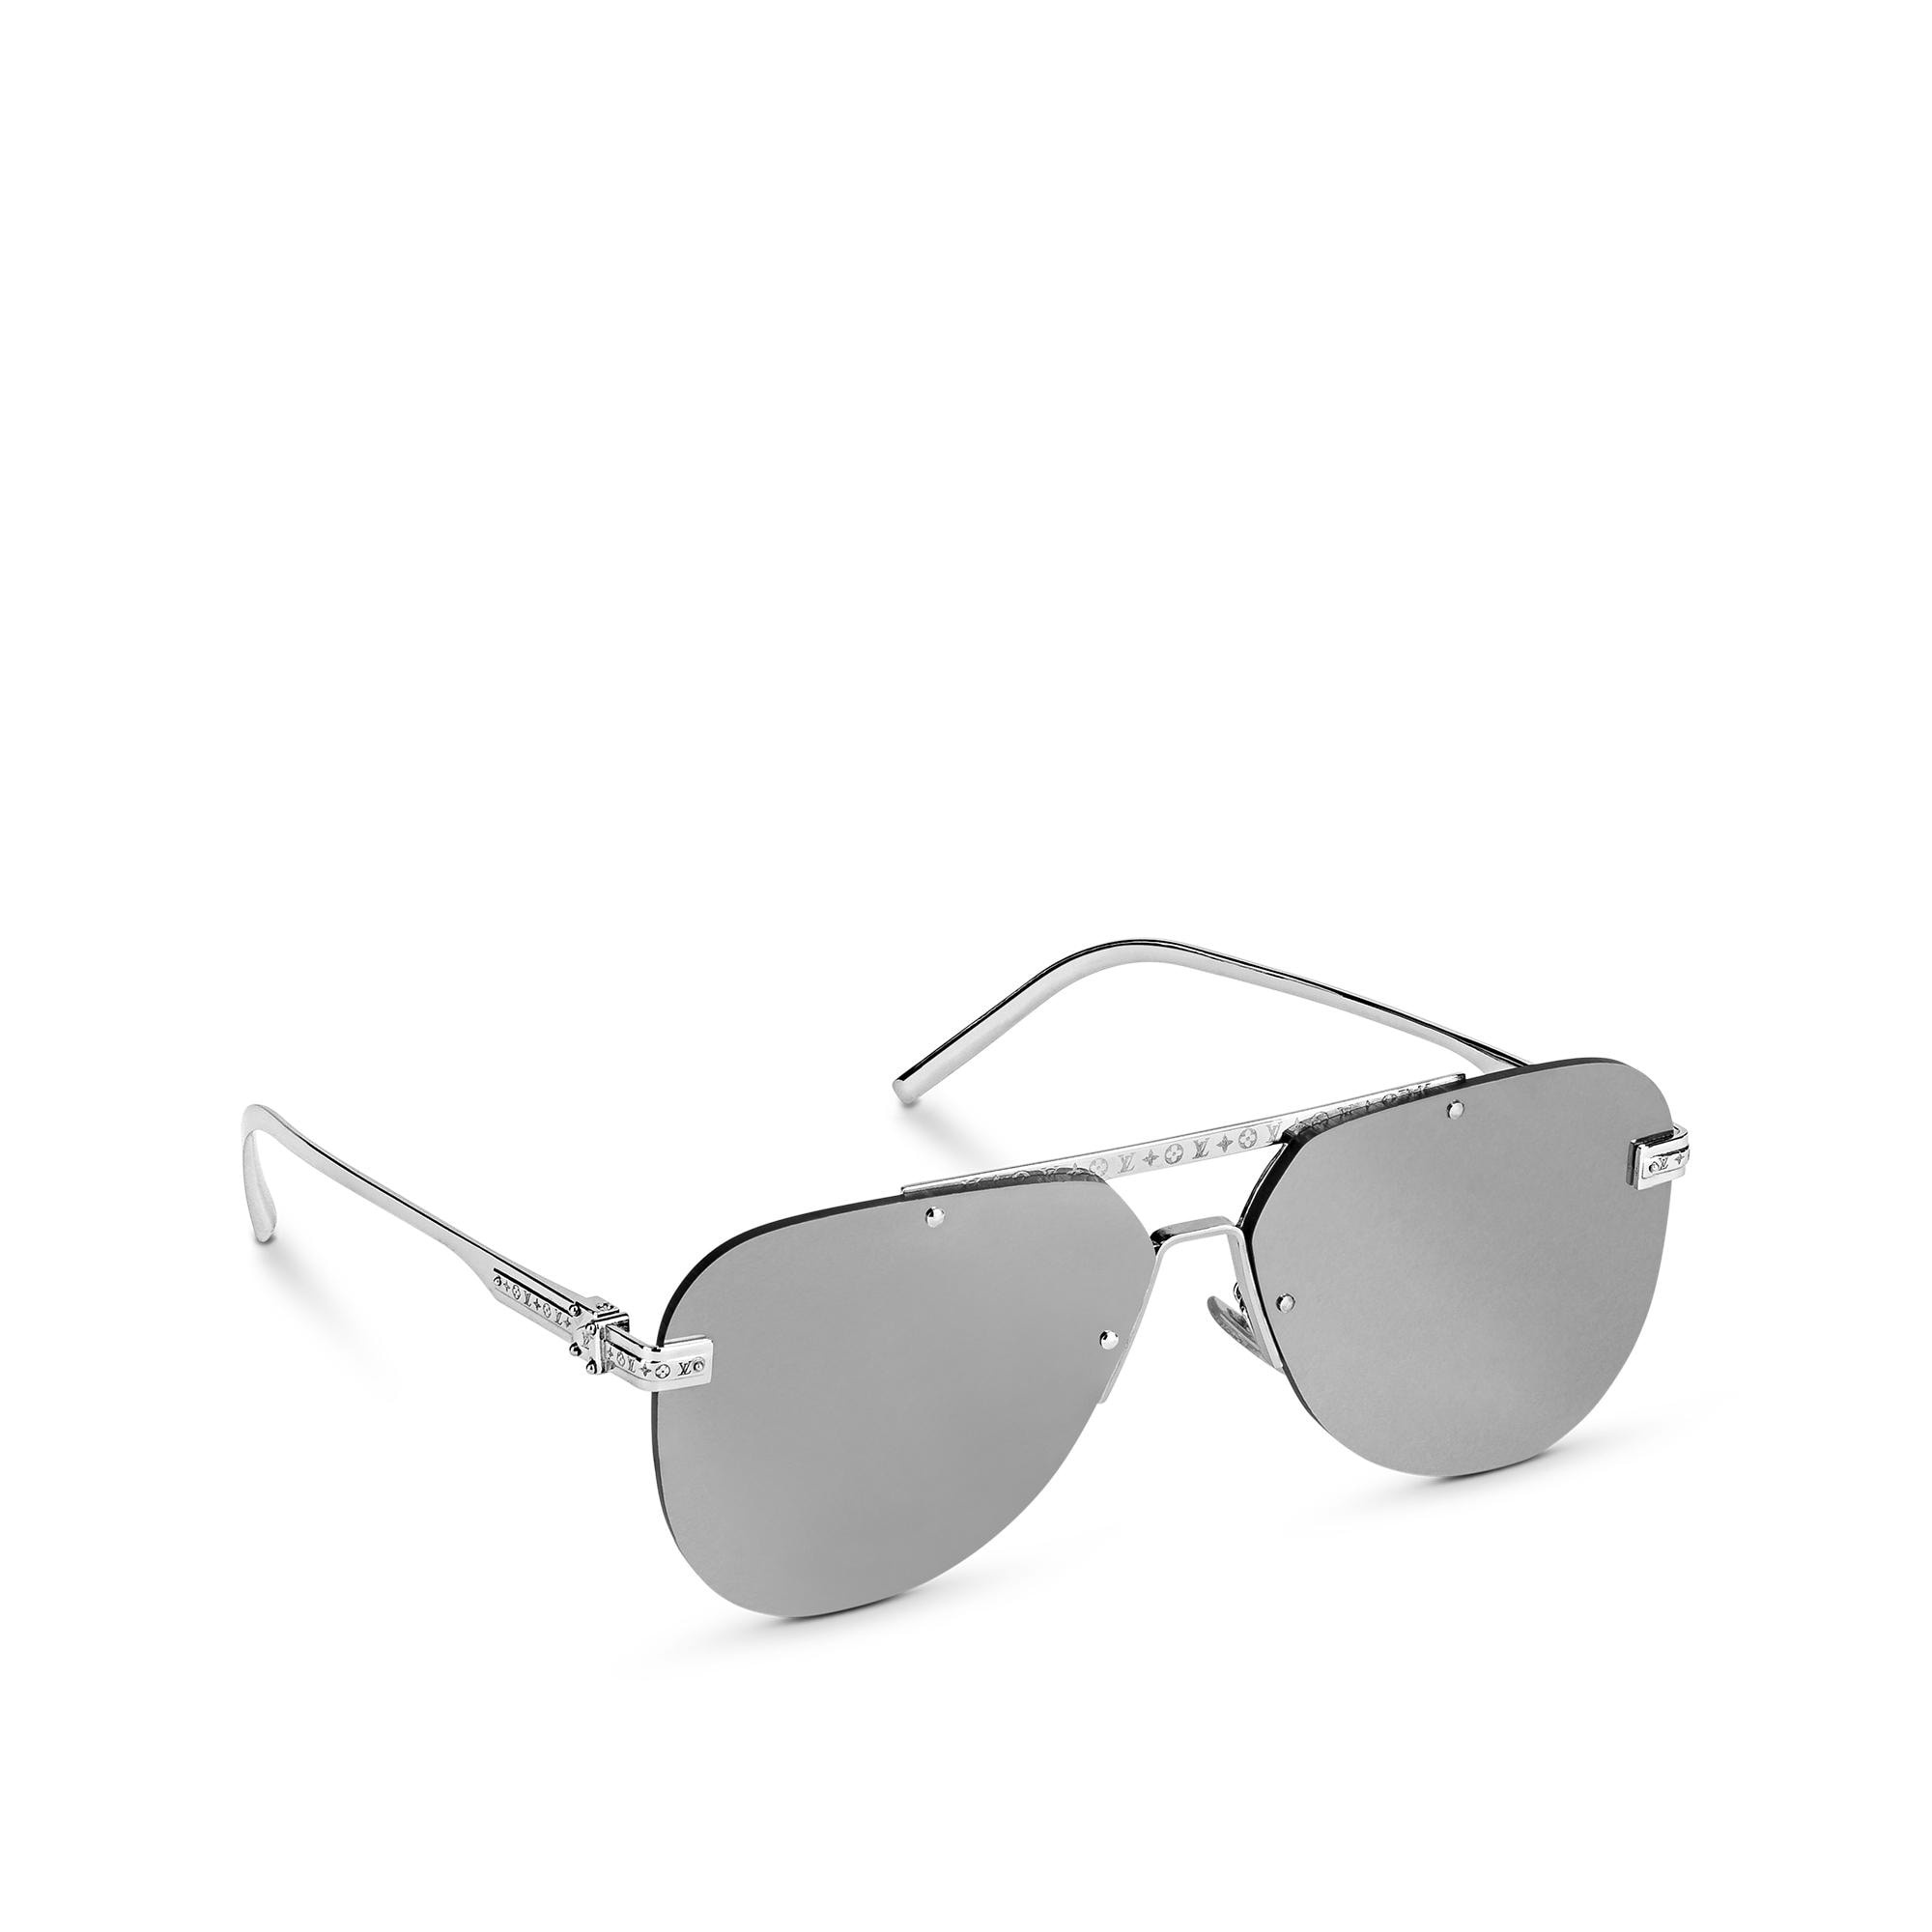 Louis Vuitton Cyclone Metal Sunglasses, Silver, One Size